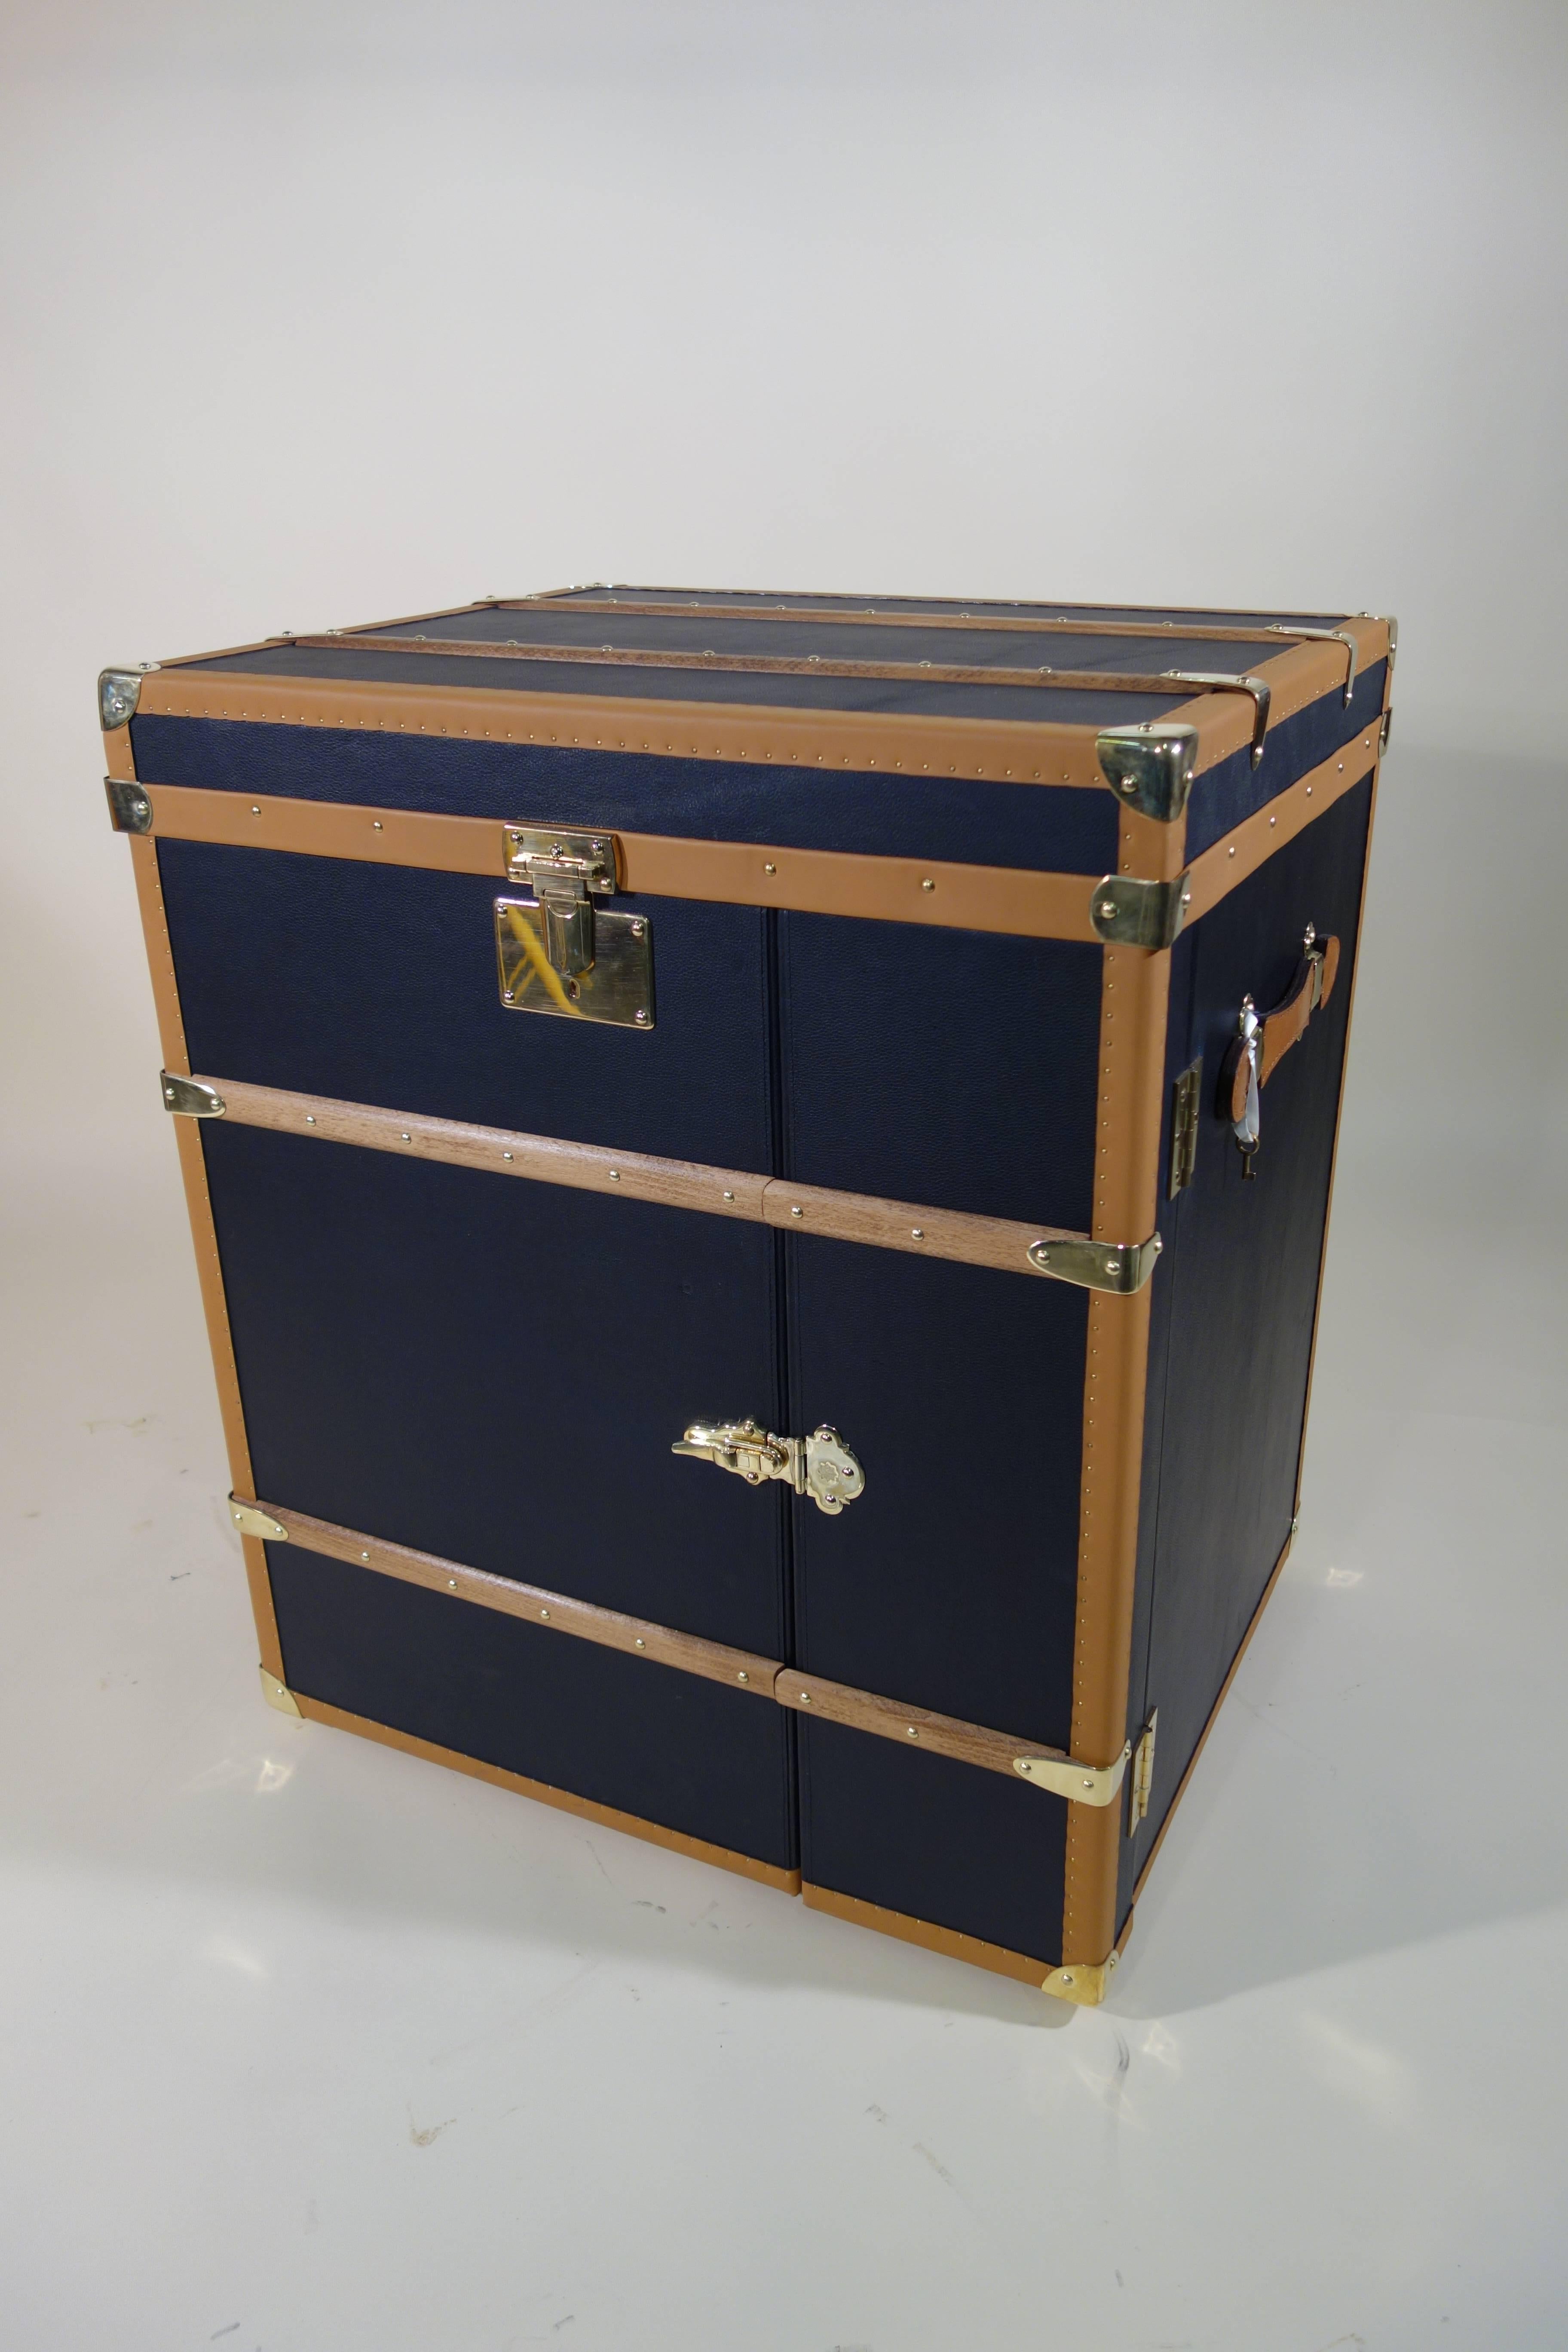 Brass Special Order Office Trunk or Malle Bureau Commande Special For Sale